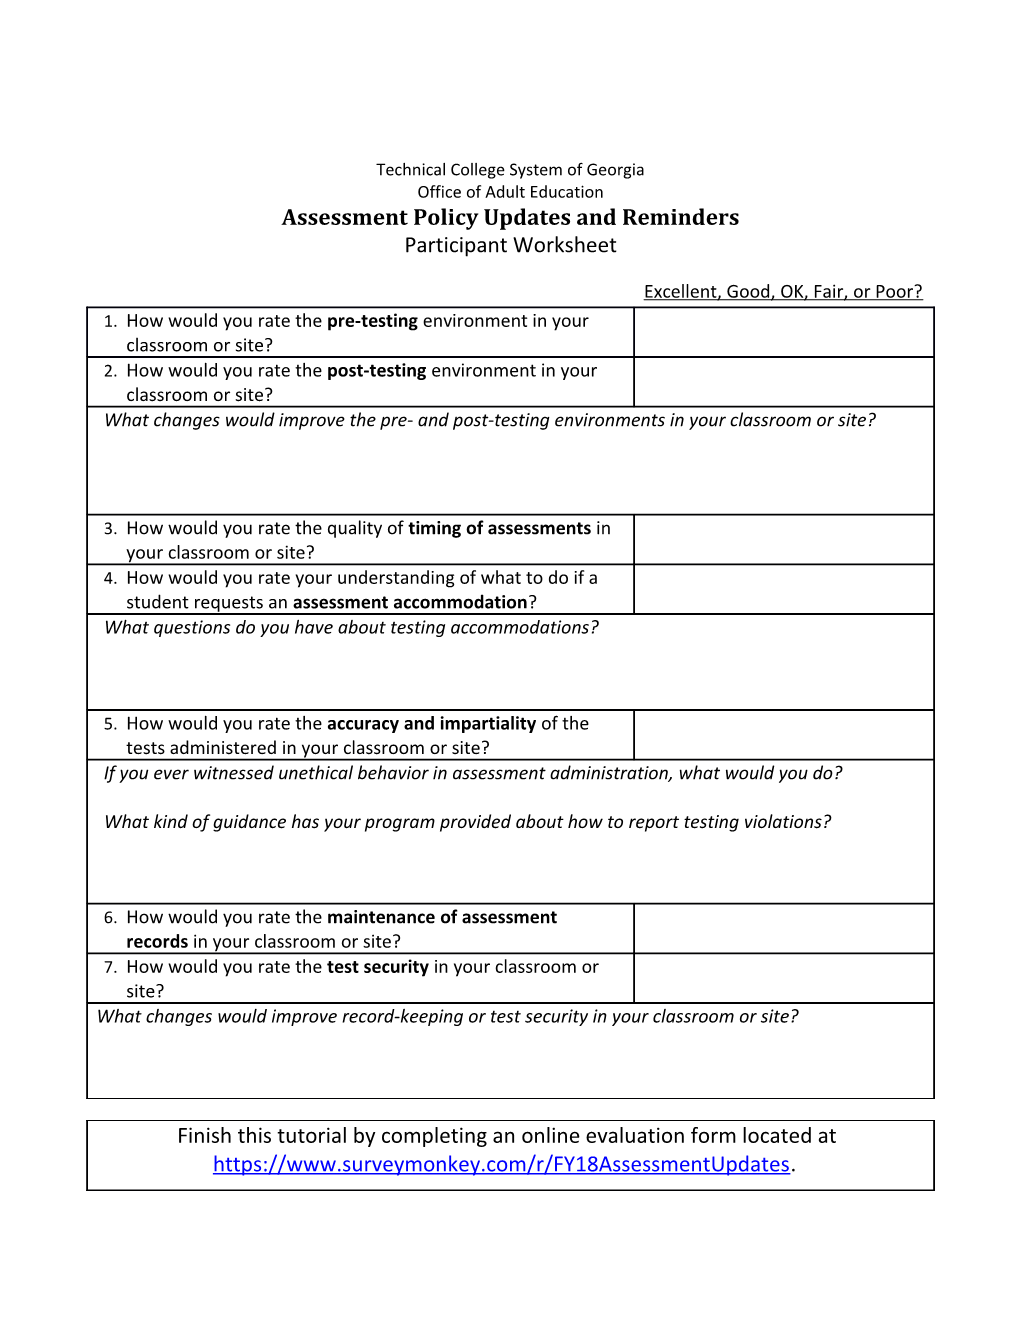 Assessment Policy Updates and Reminders